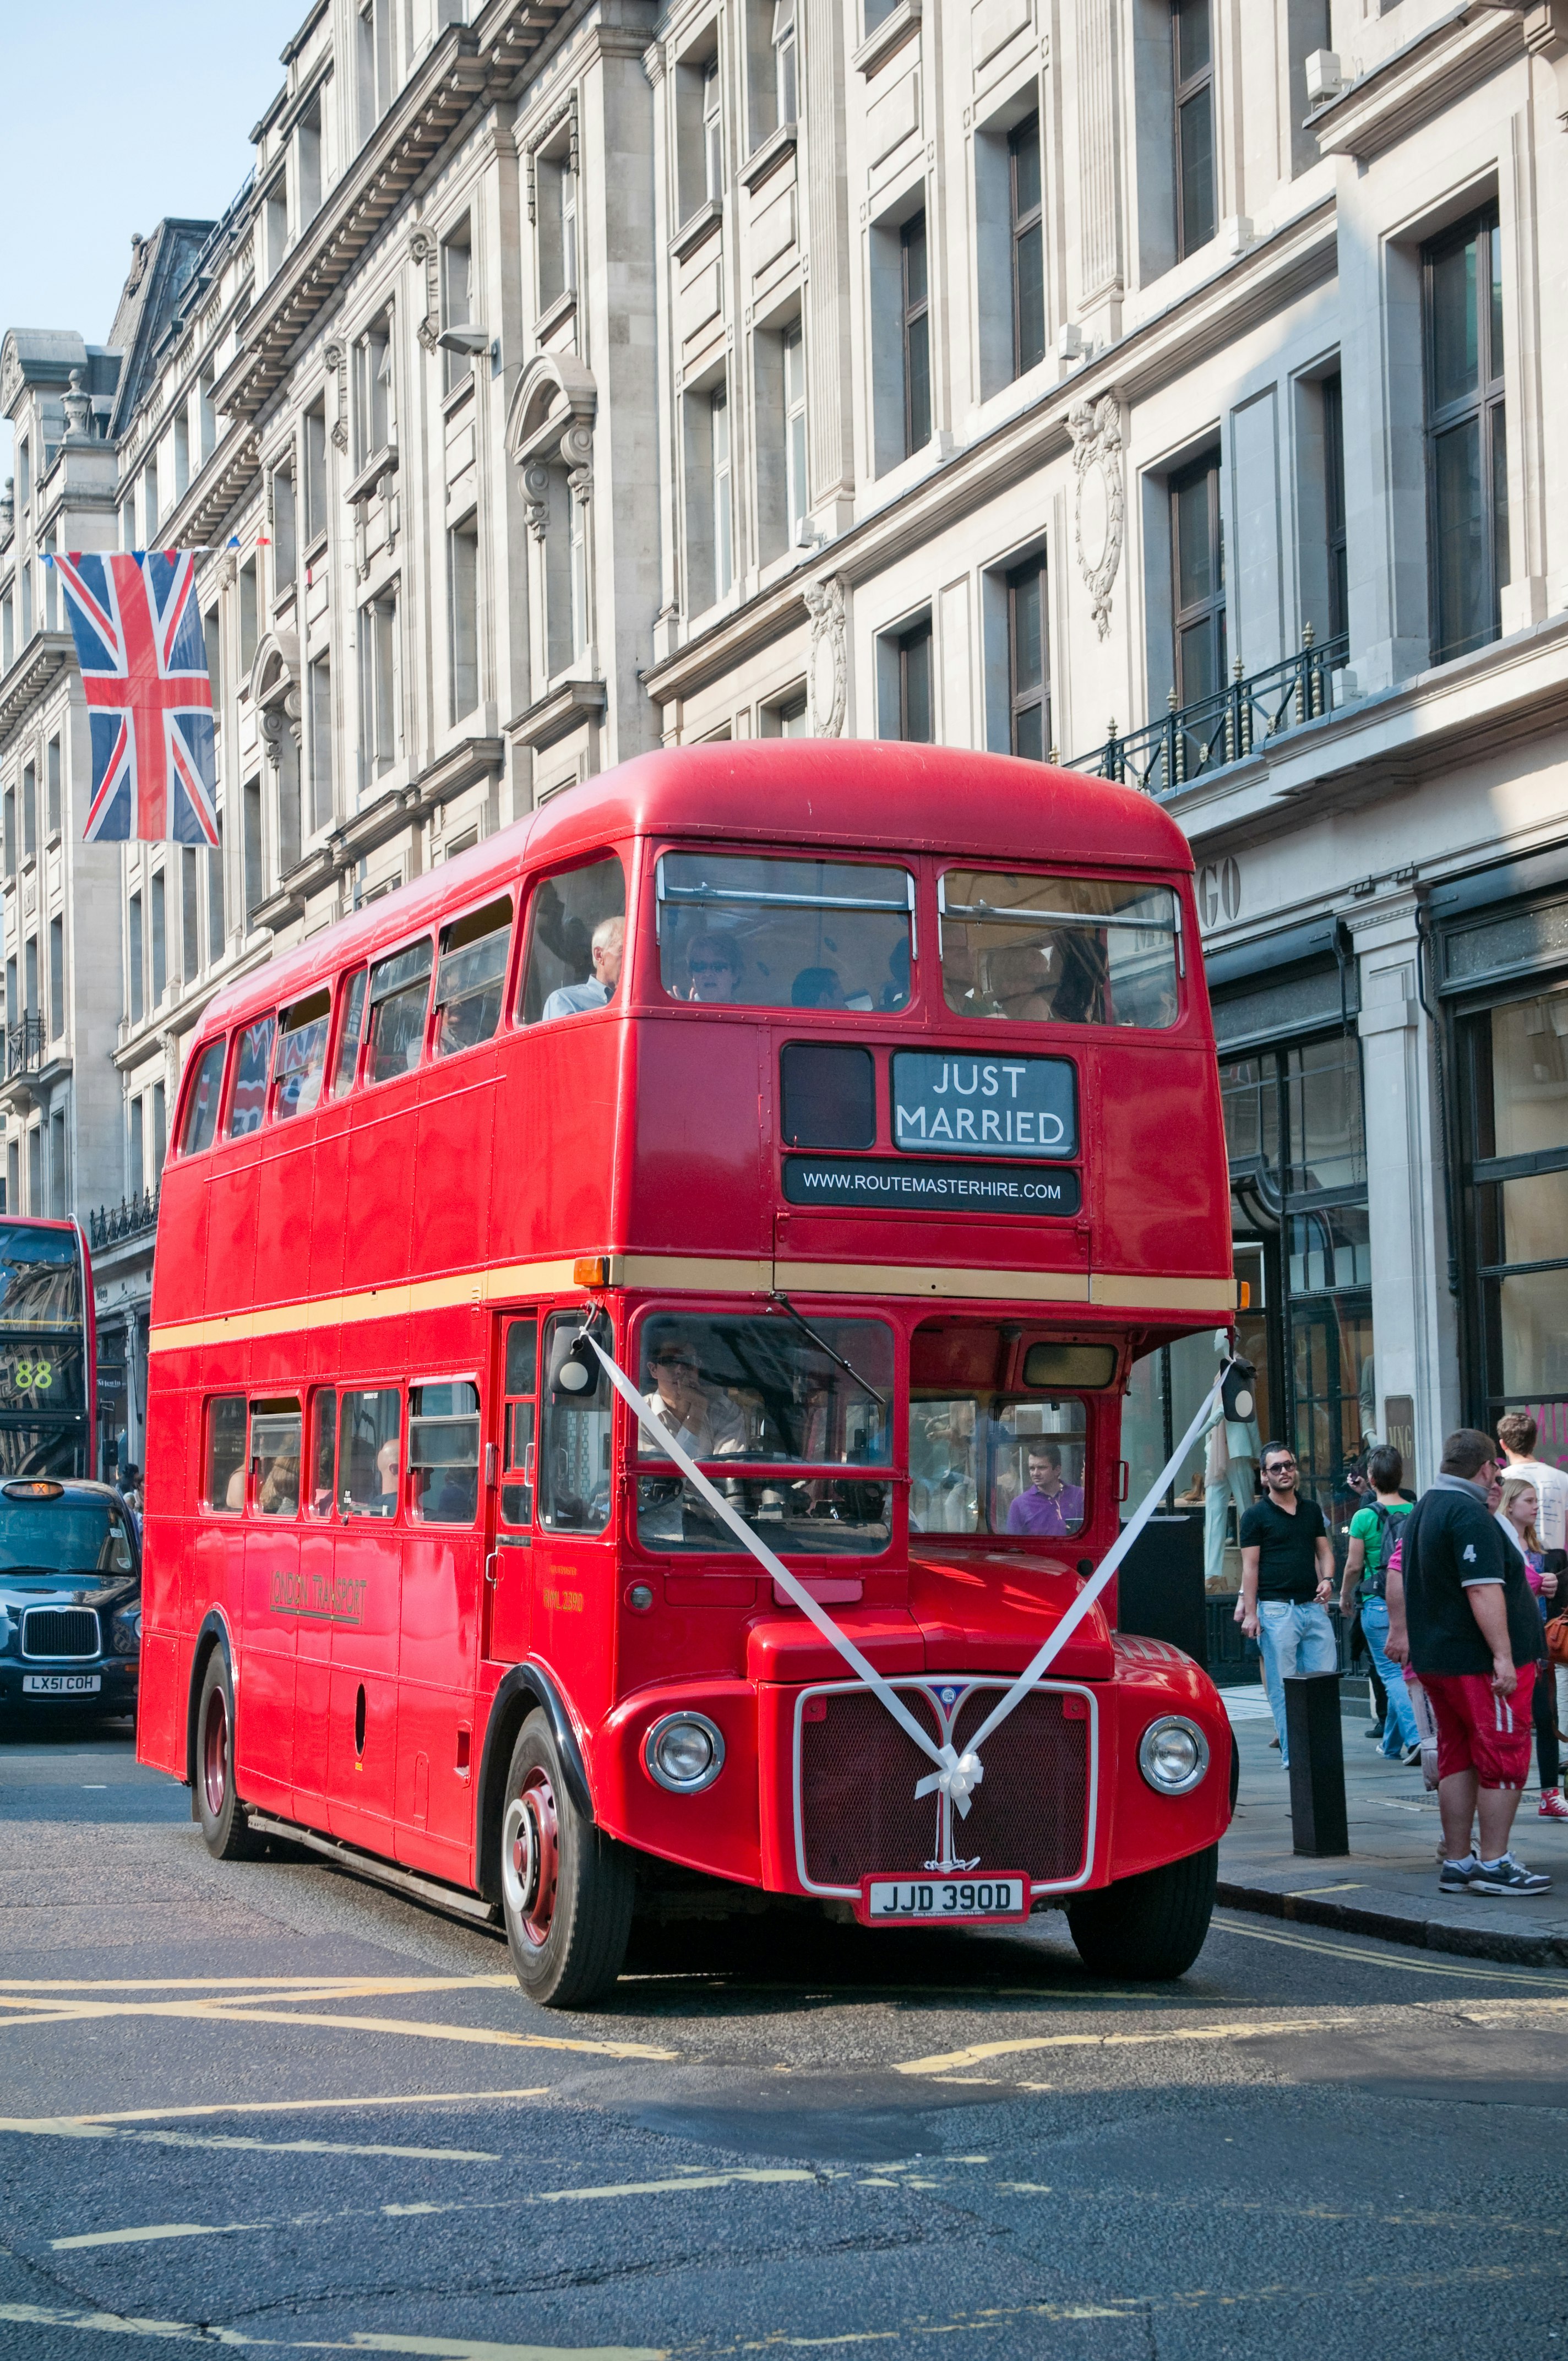 A red Routemaster bus travelling down a London street. It's decorated with white ribbon and bus blind says "Just Married".